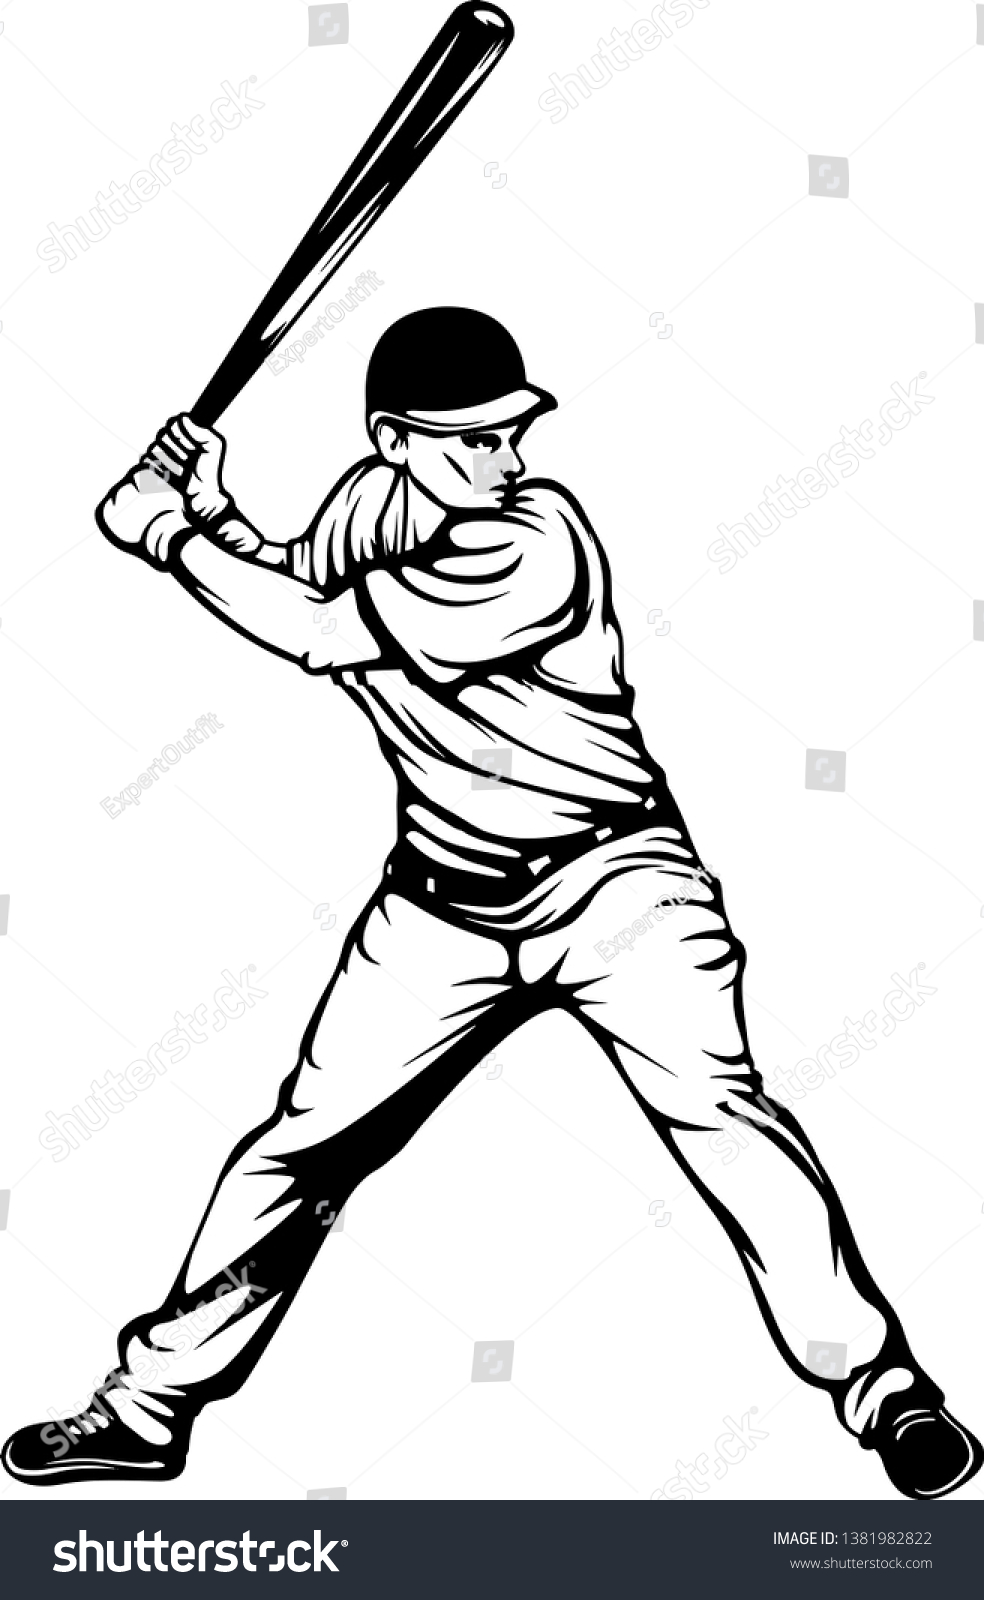 SVG of A Baseball Player At Bat in A Batting Stance Getting Ready To Hit Ball svg